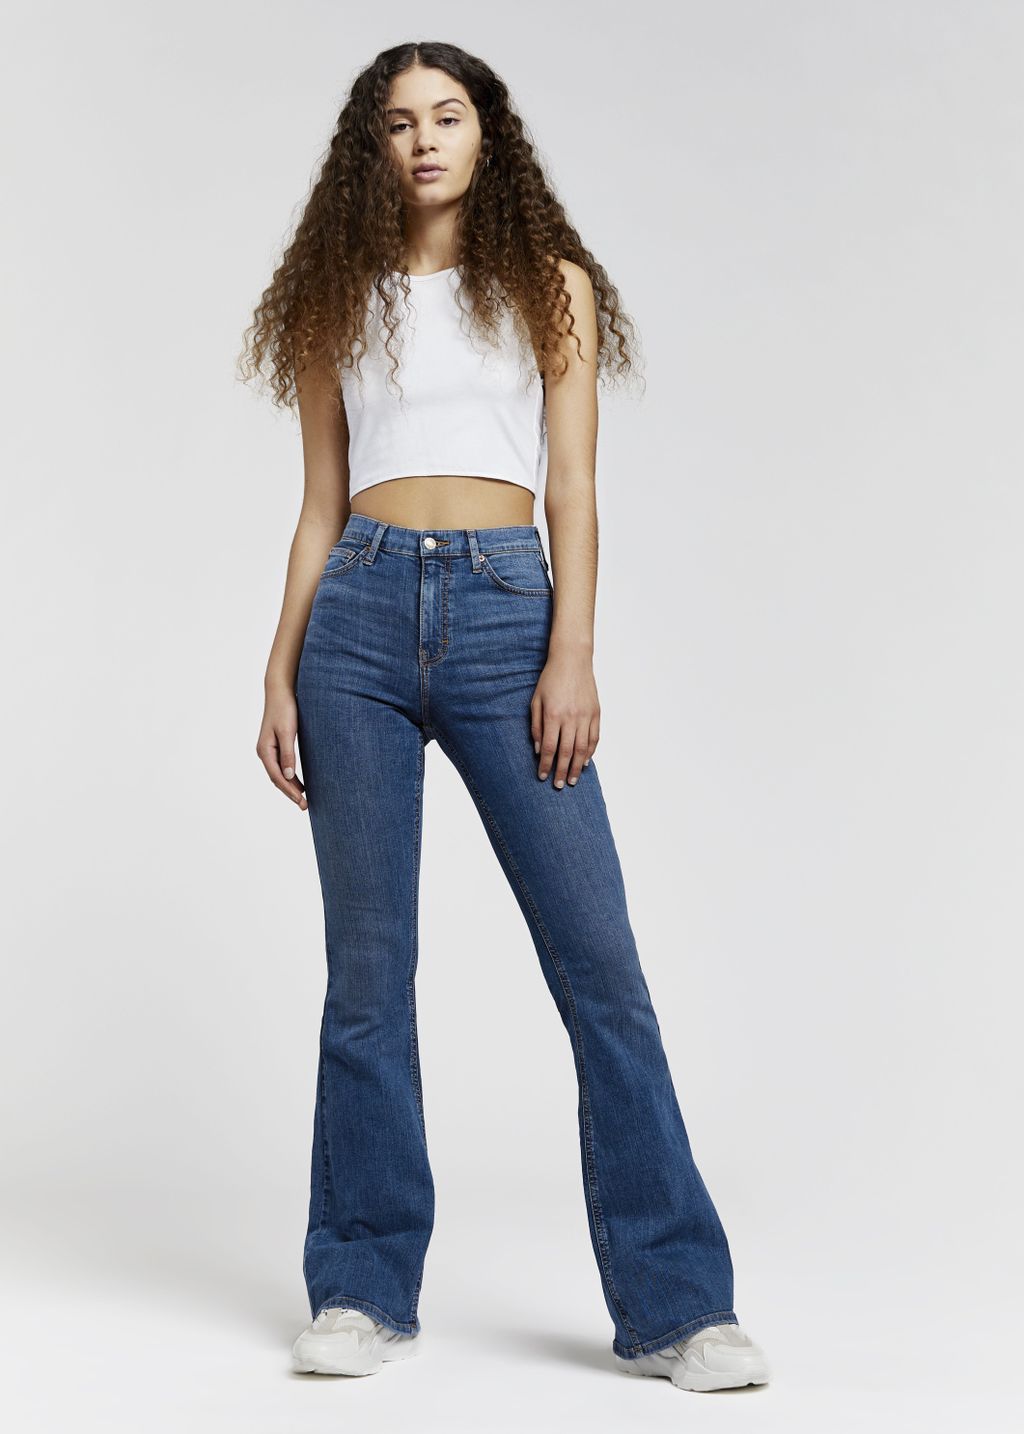 New Topshop Denim | Who What Wear